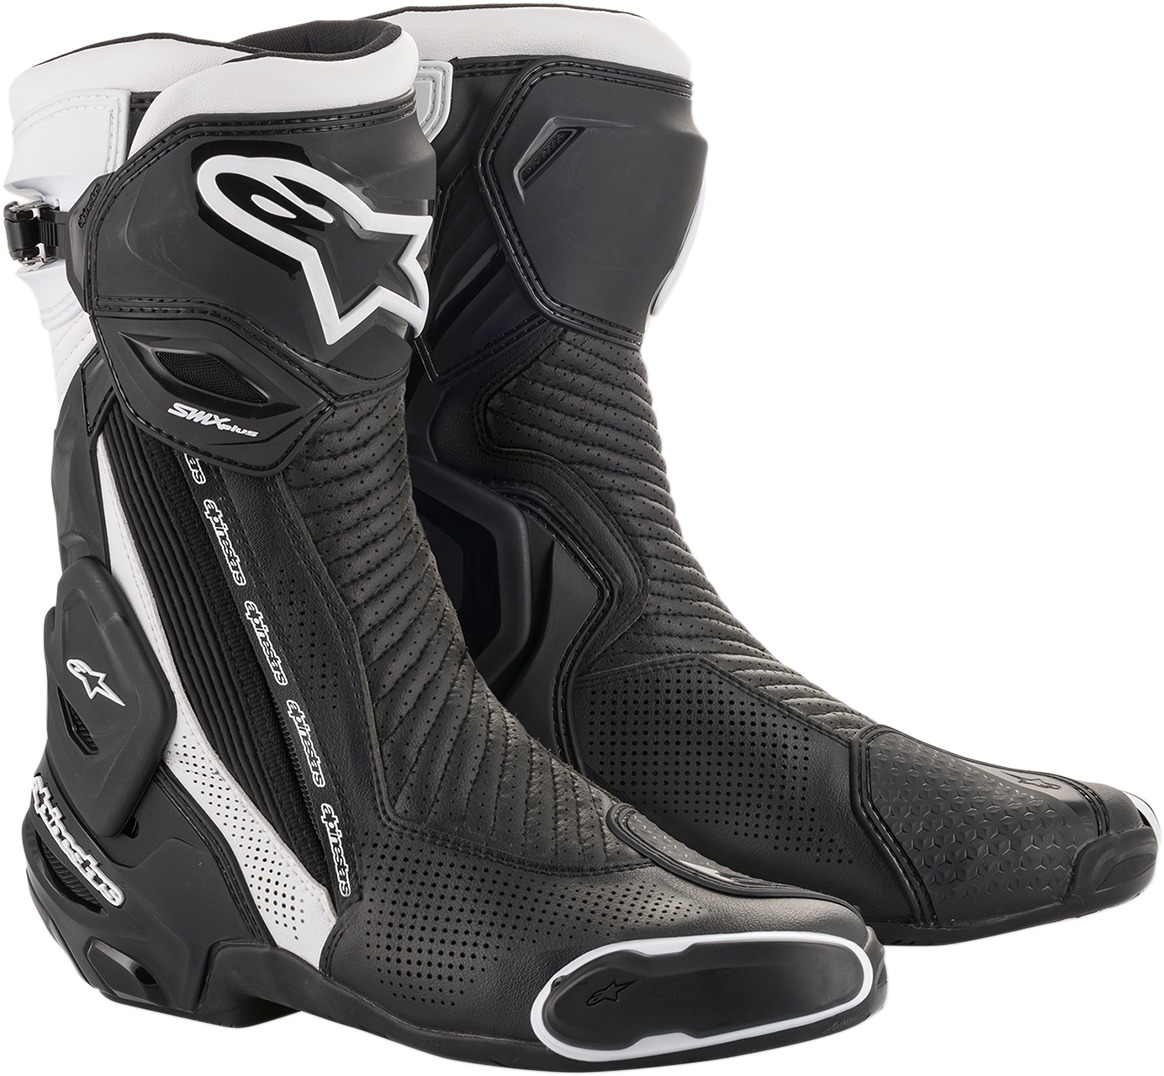 SMX Plus Street Riding Boots Black/White US 10.5 - Click Image to Close